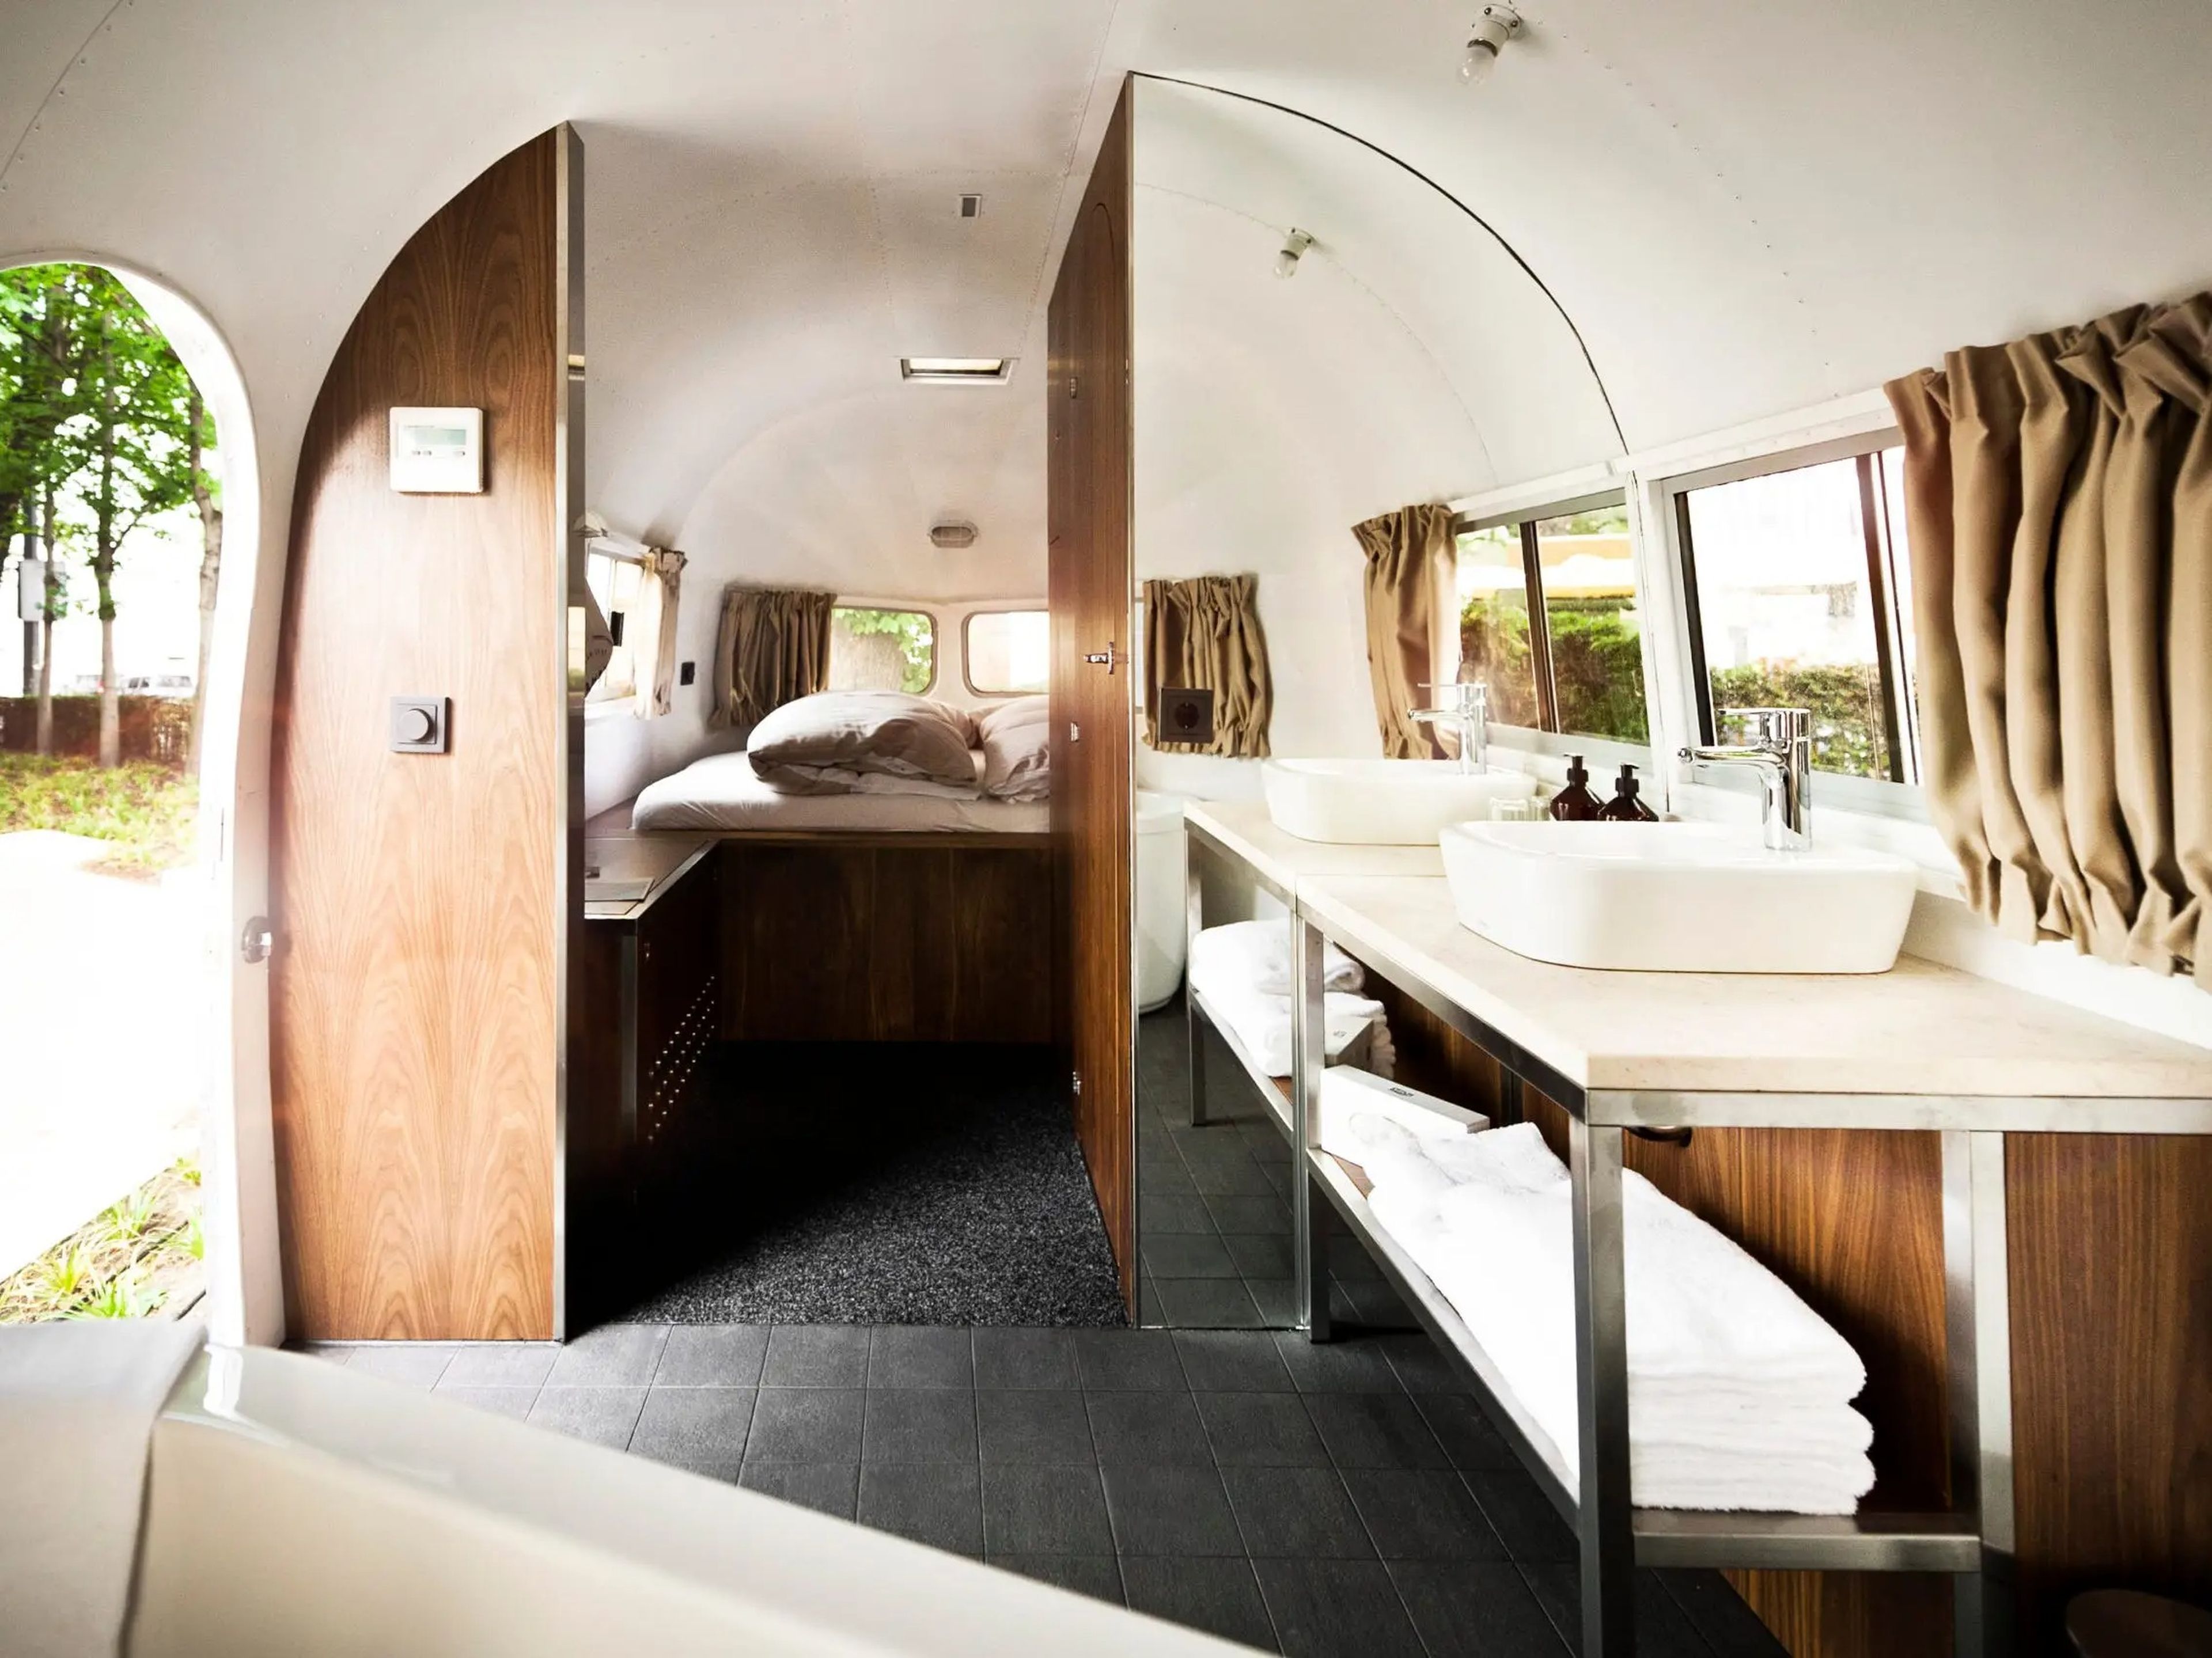 Inside the airstream trailer.